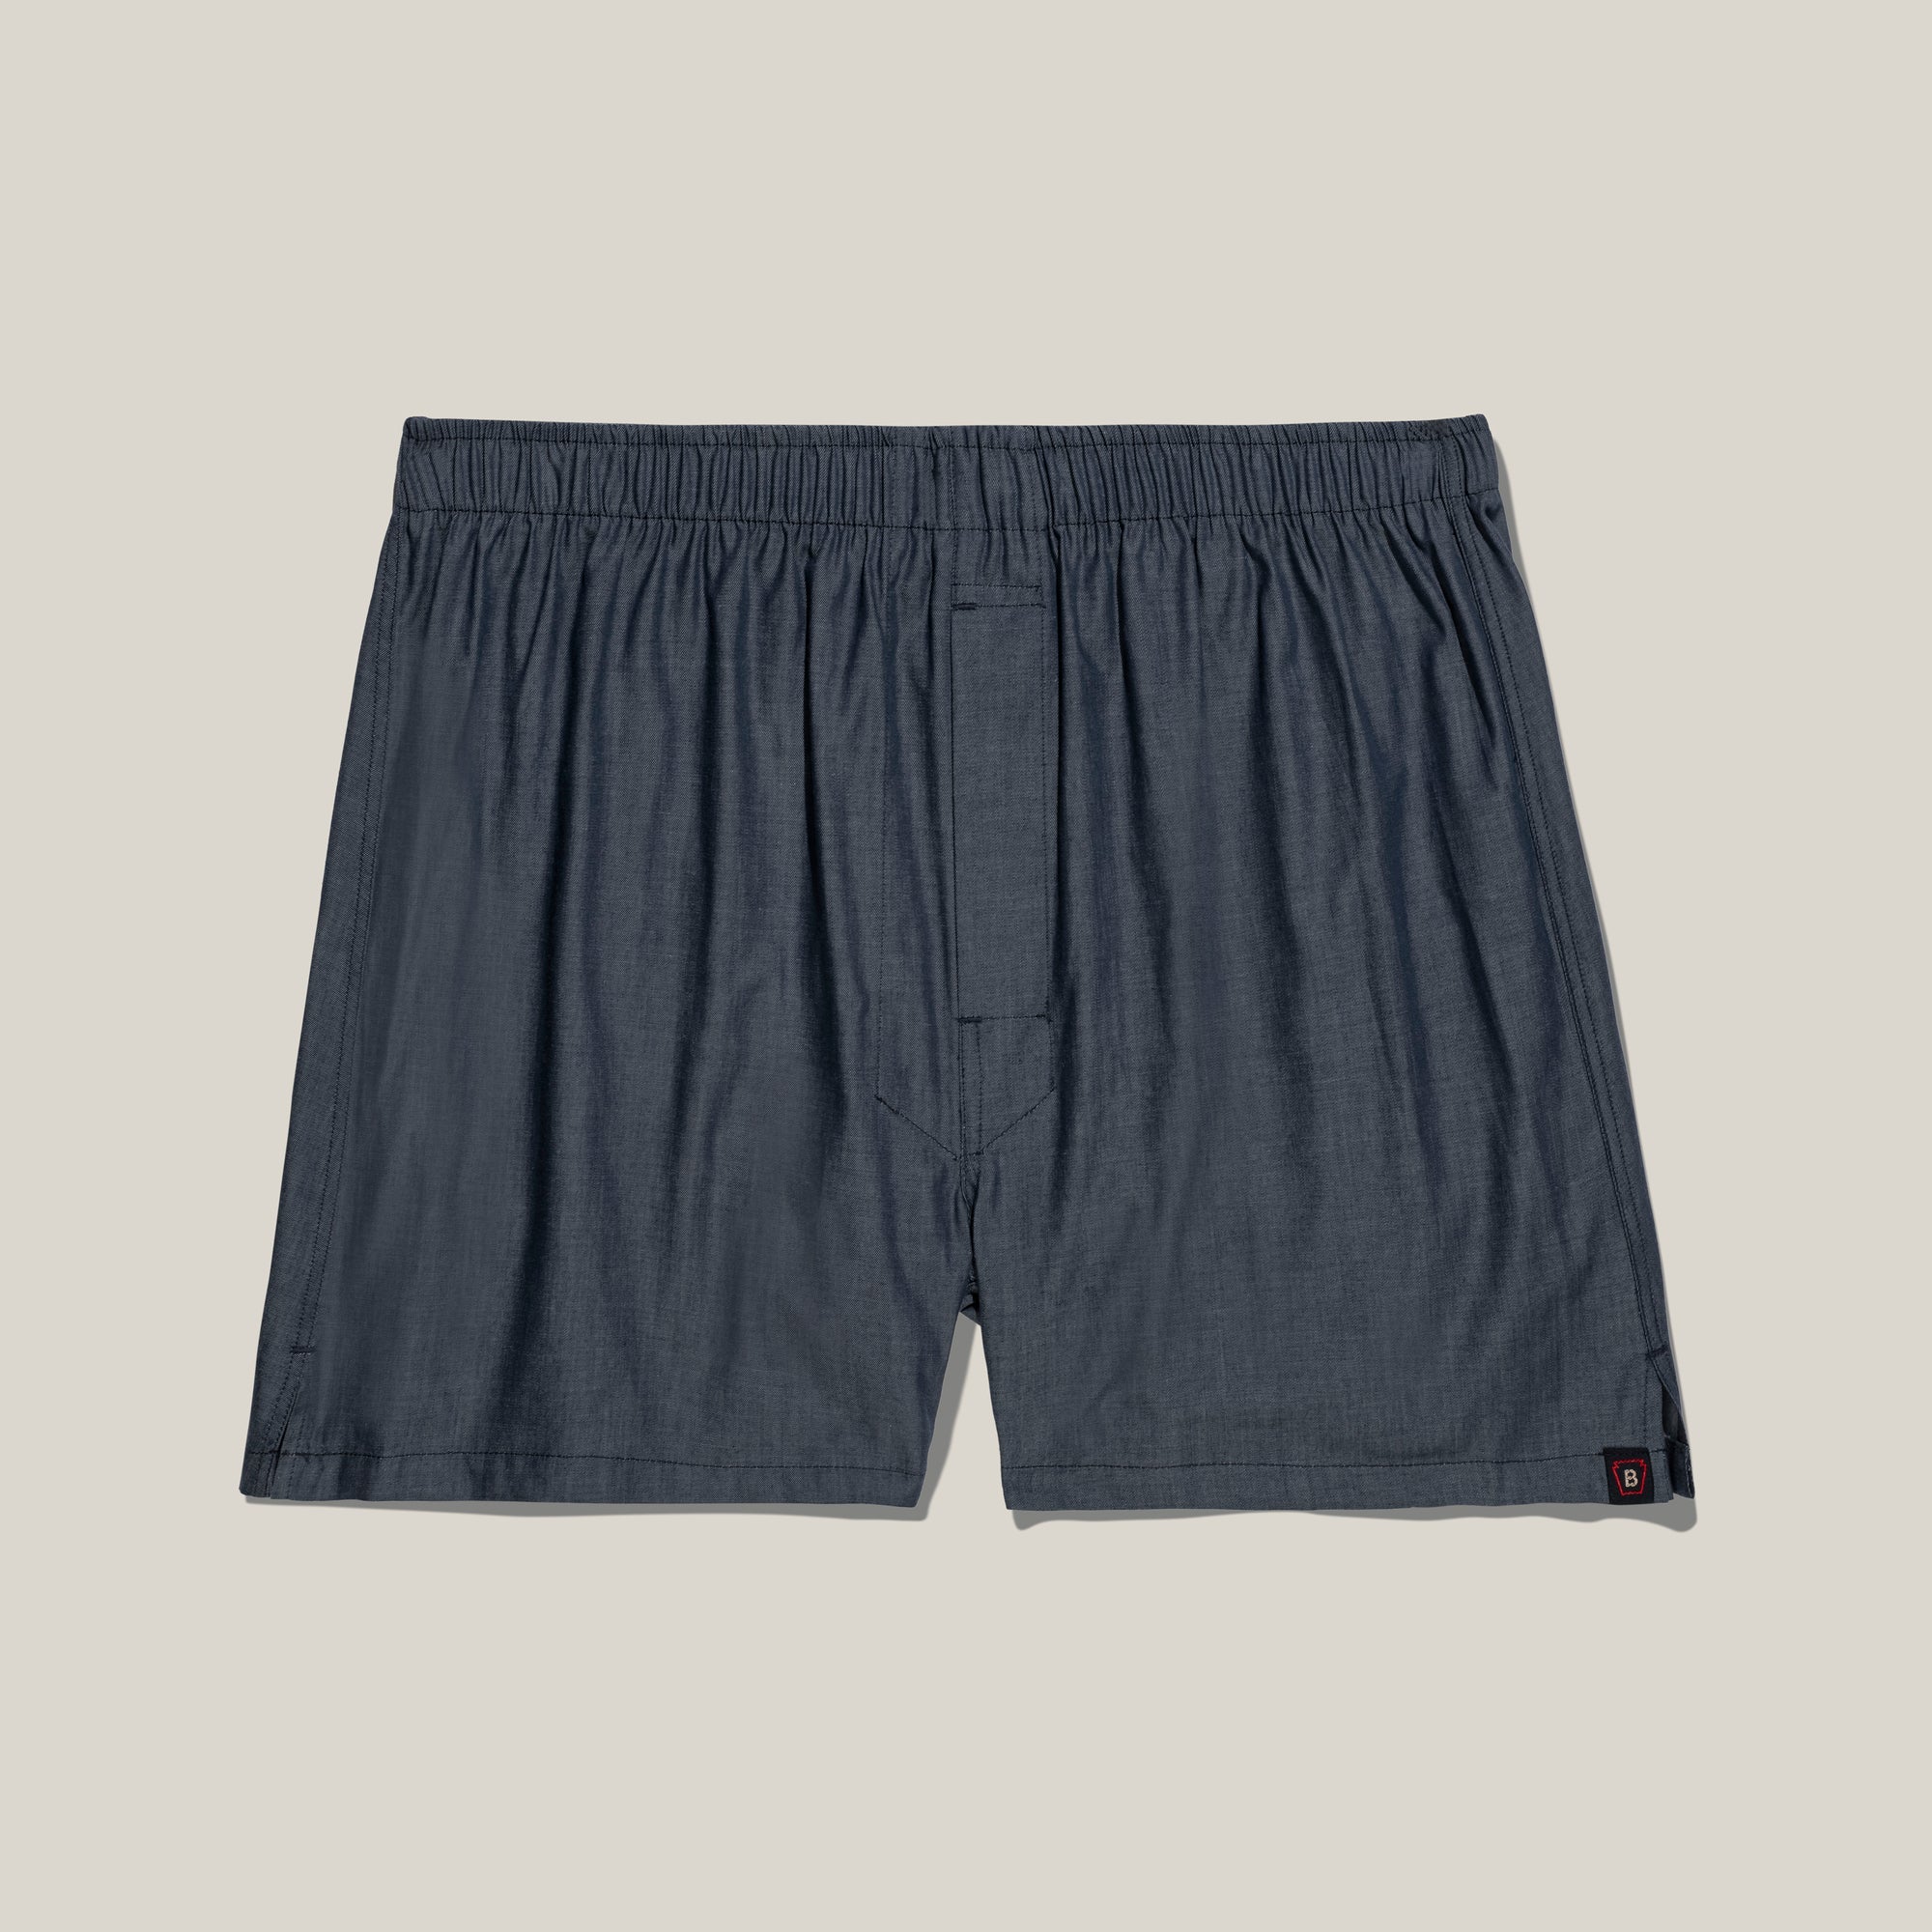 Classic Cotton Boxer in Denim Blue Twill (Size XX-Large) by Bills Khakis